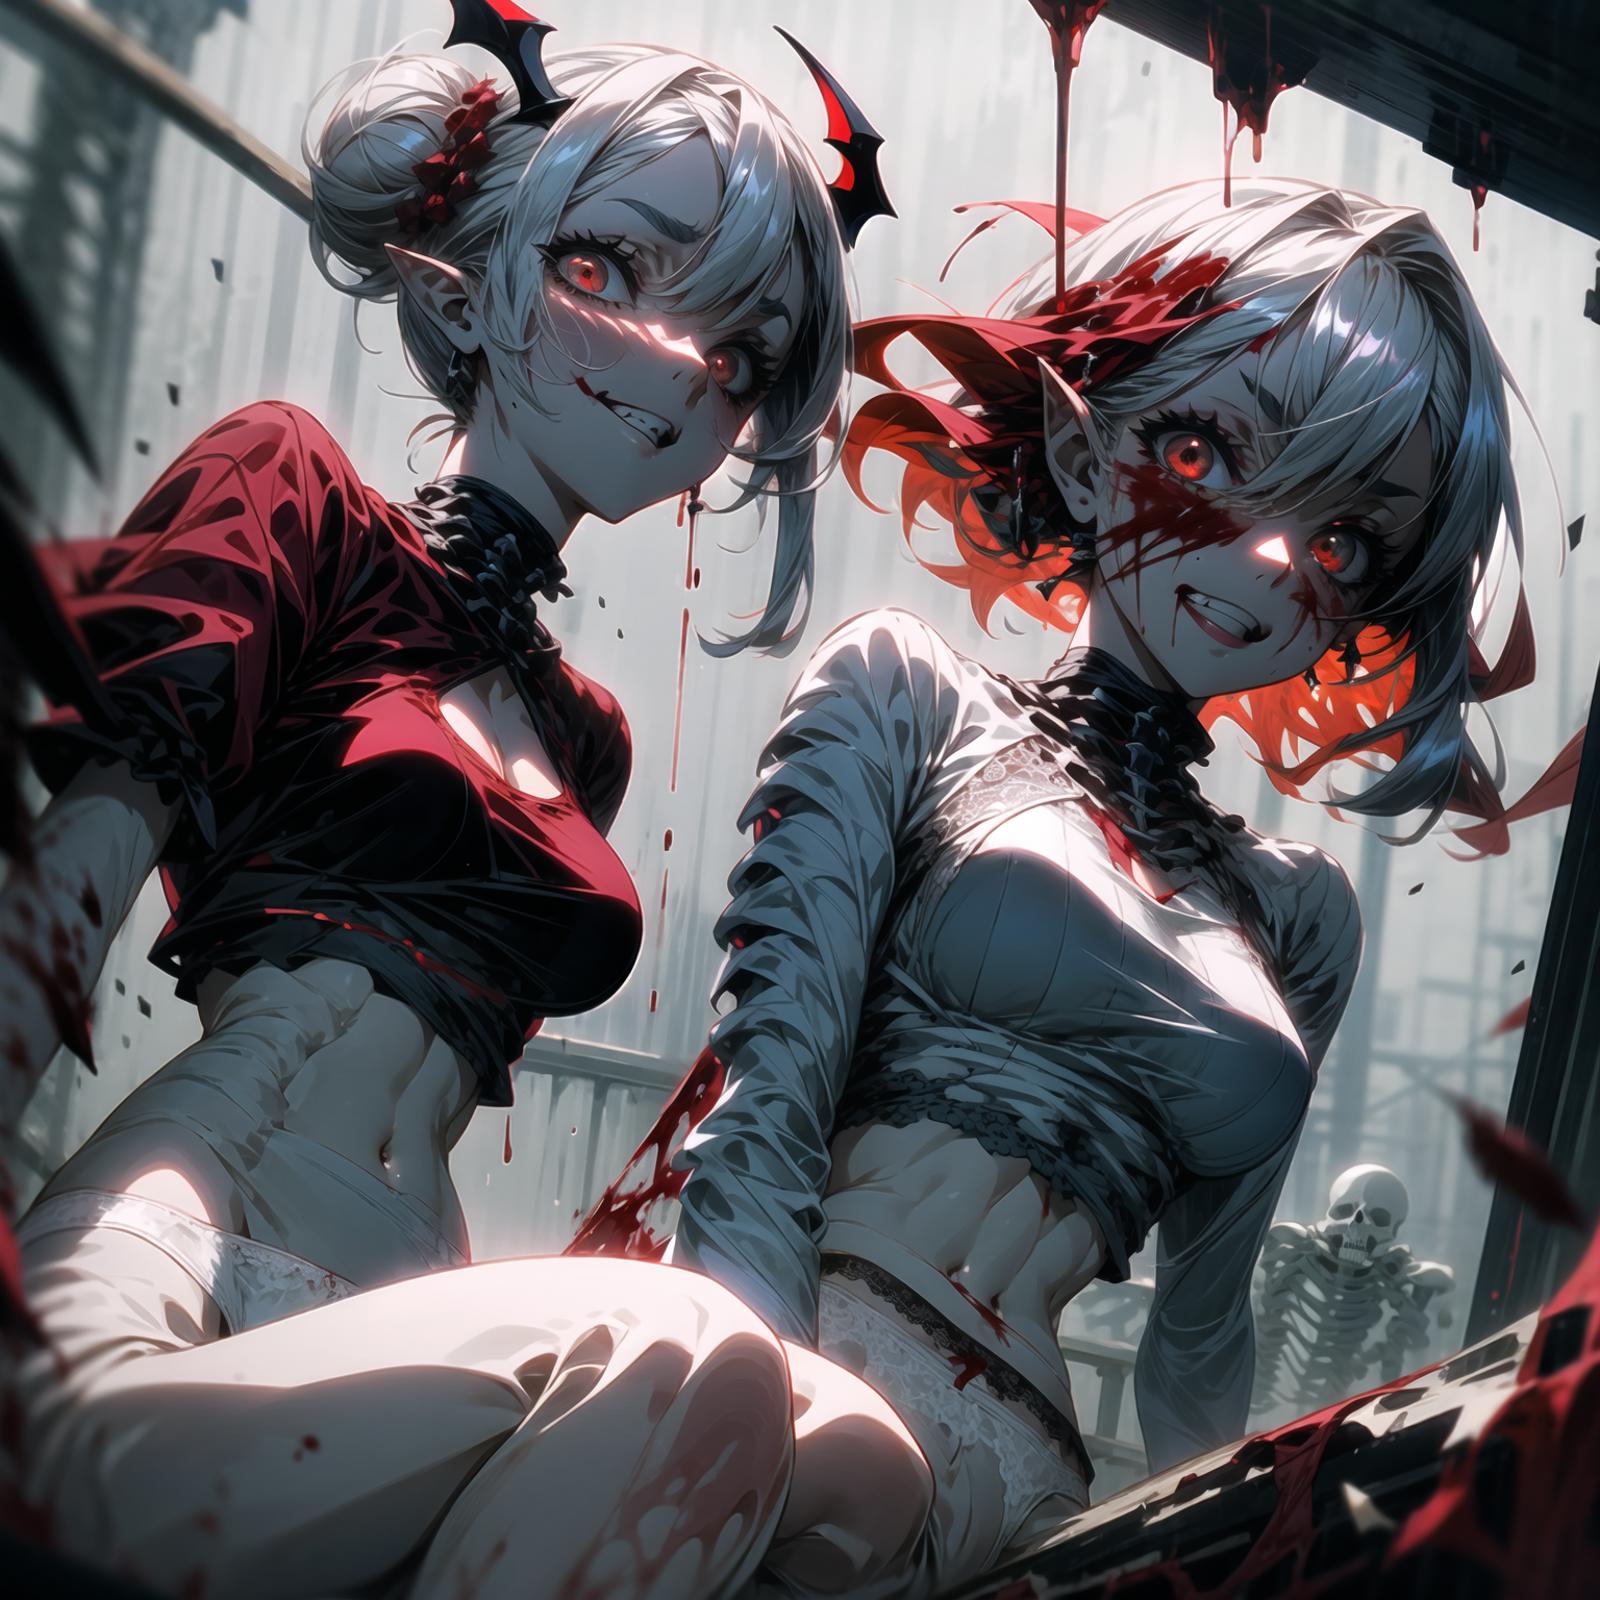 Two anime girls with blood on them and one with red eyes.